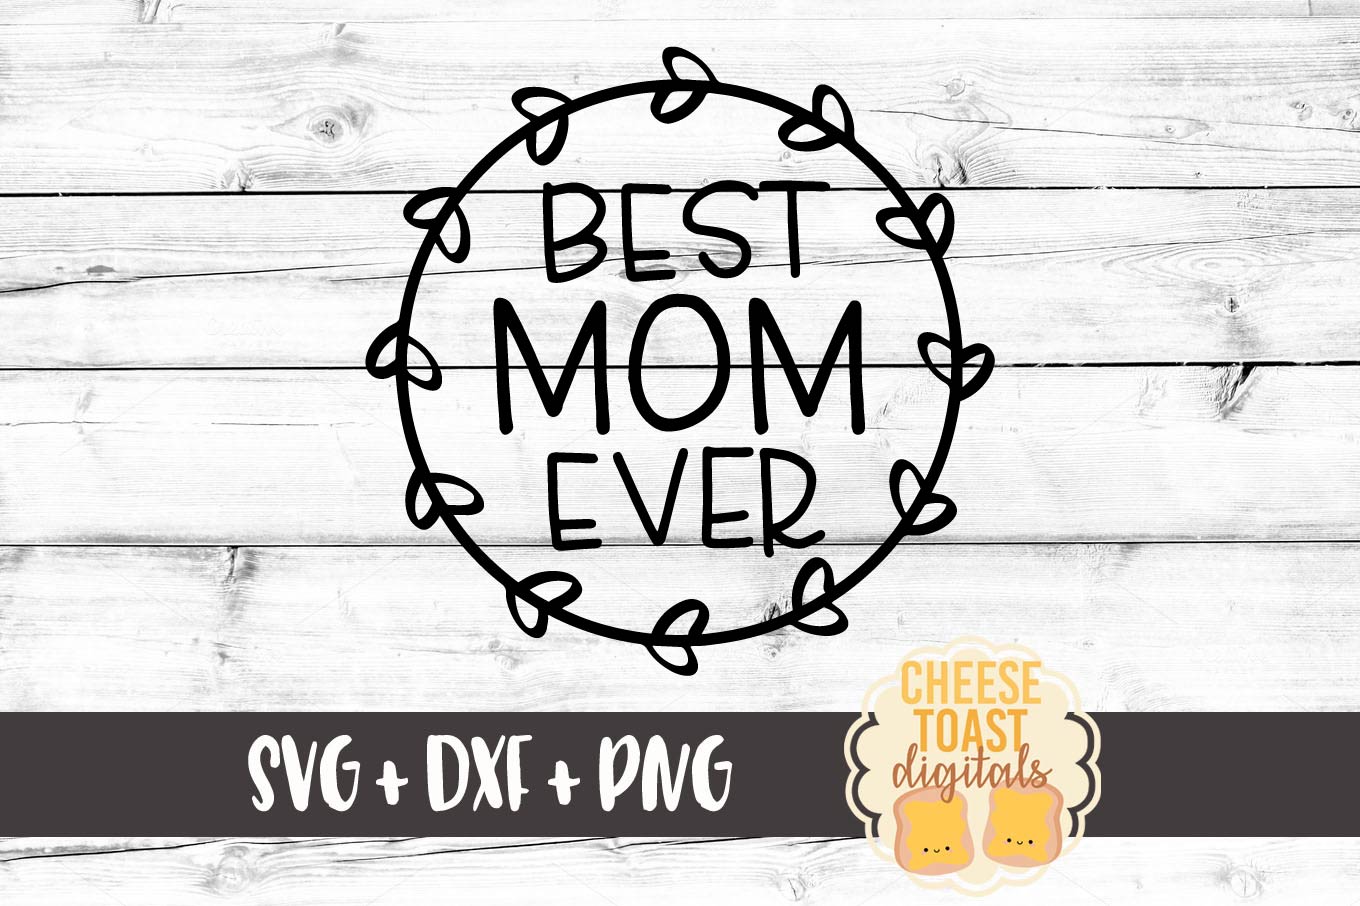 Download Best Mom Ever with Wreath - Mother's Day SVG PNG DXF (73210) | SVGs | Design Bundles